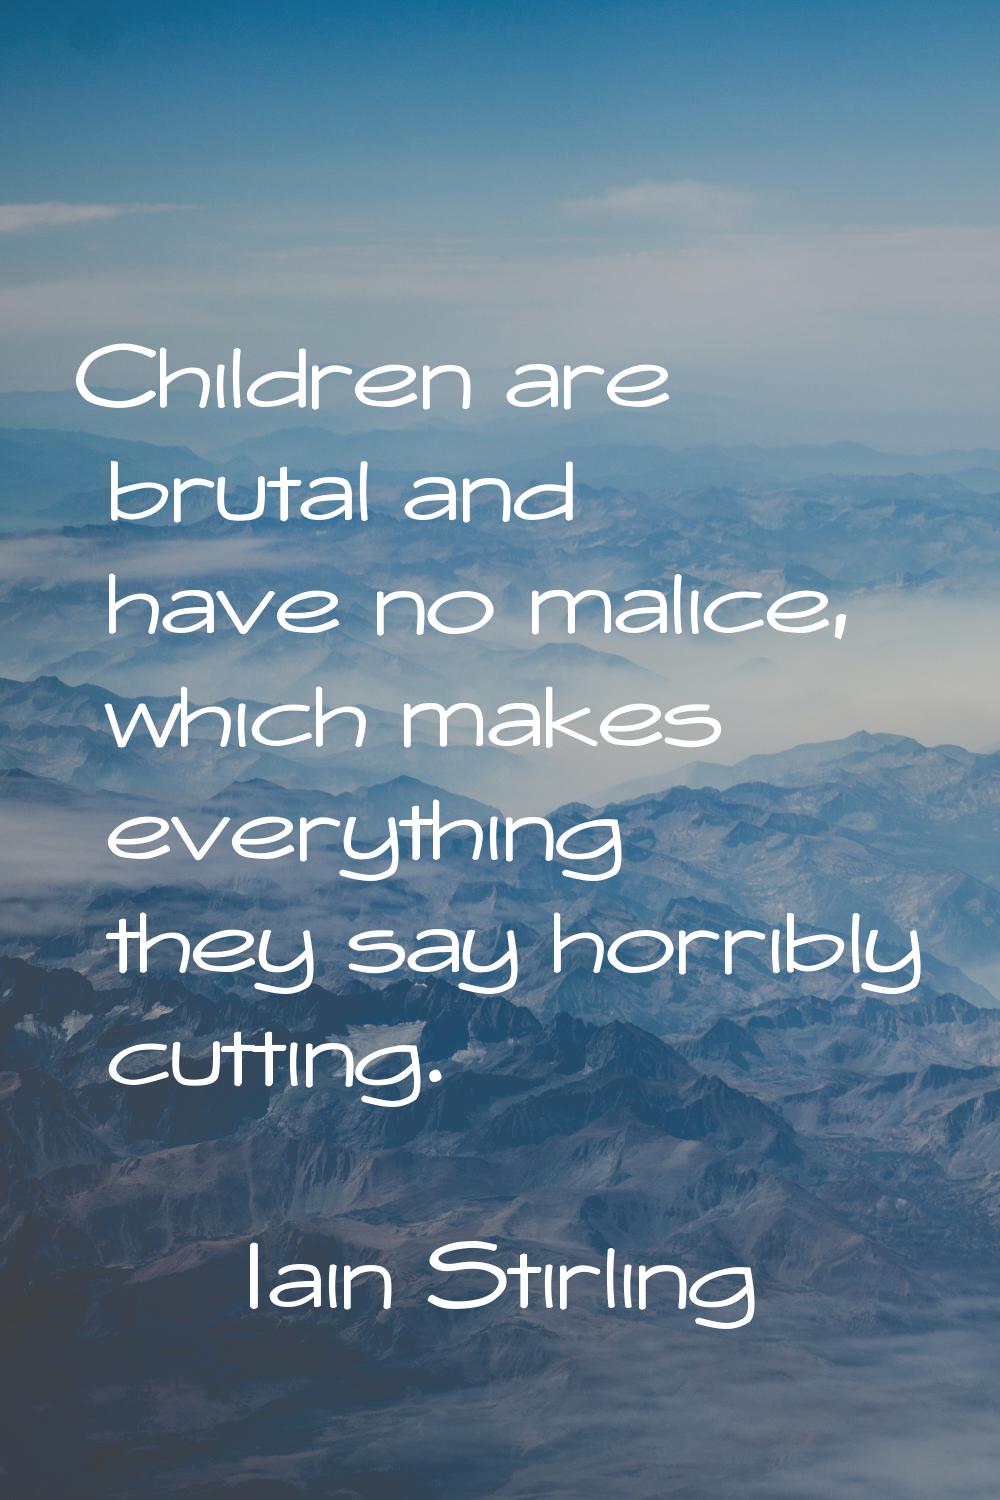 Children are brutal and have no malice, which makes everything they say horribly cutting.